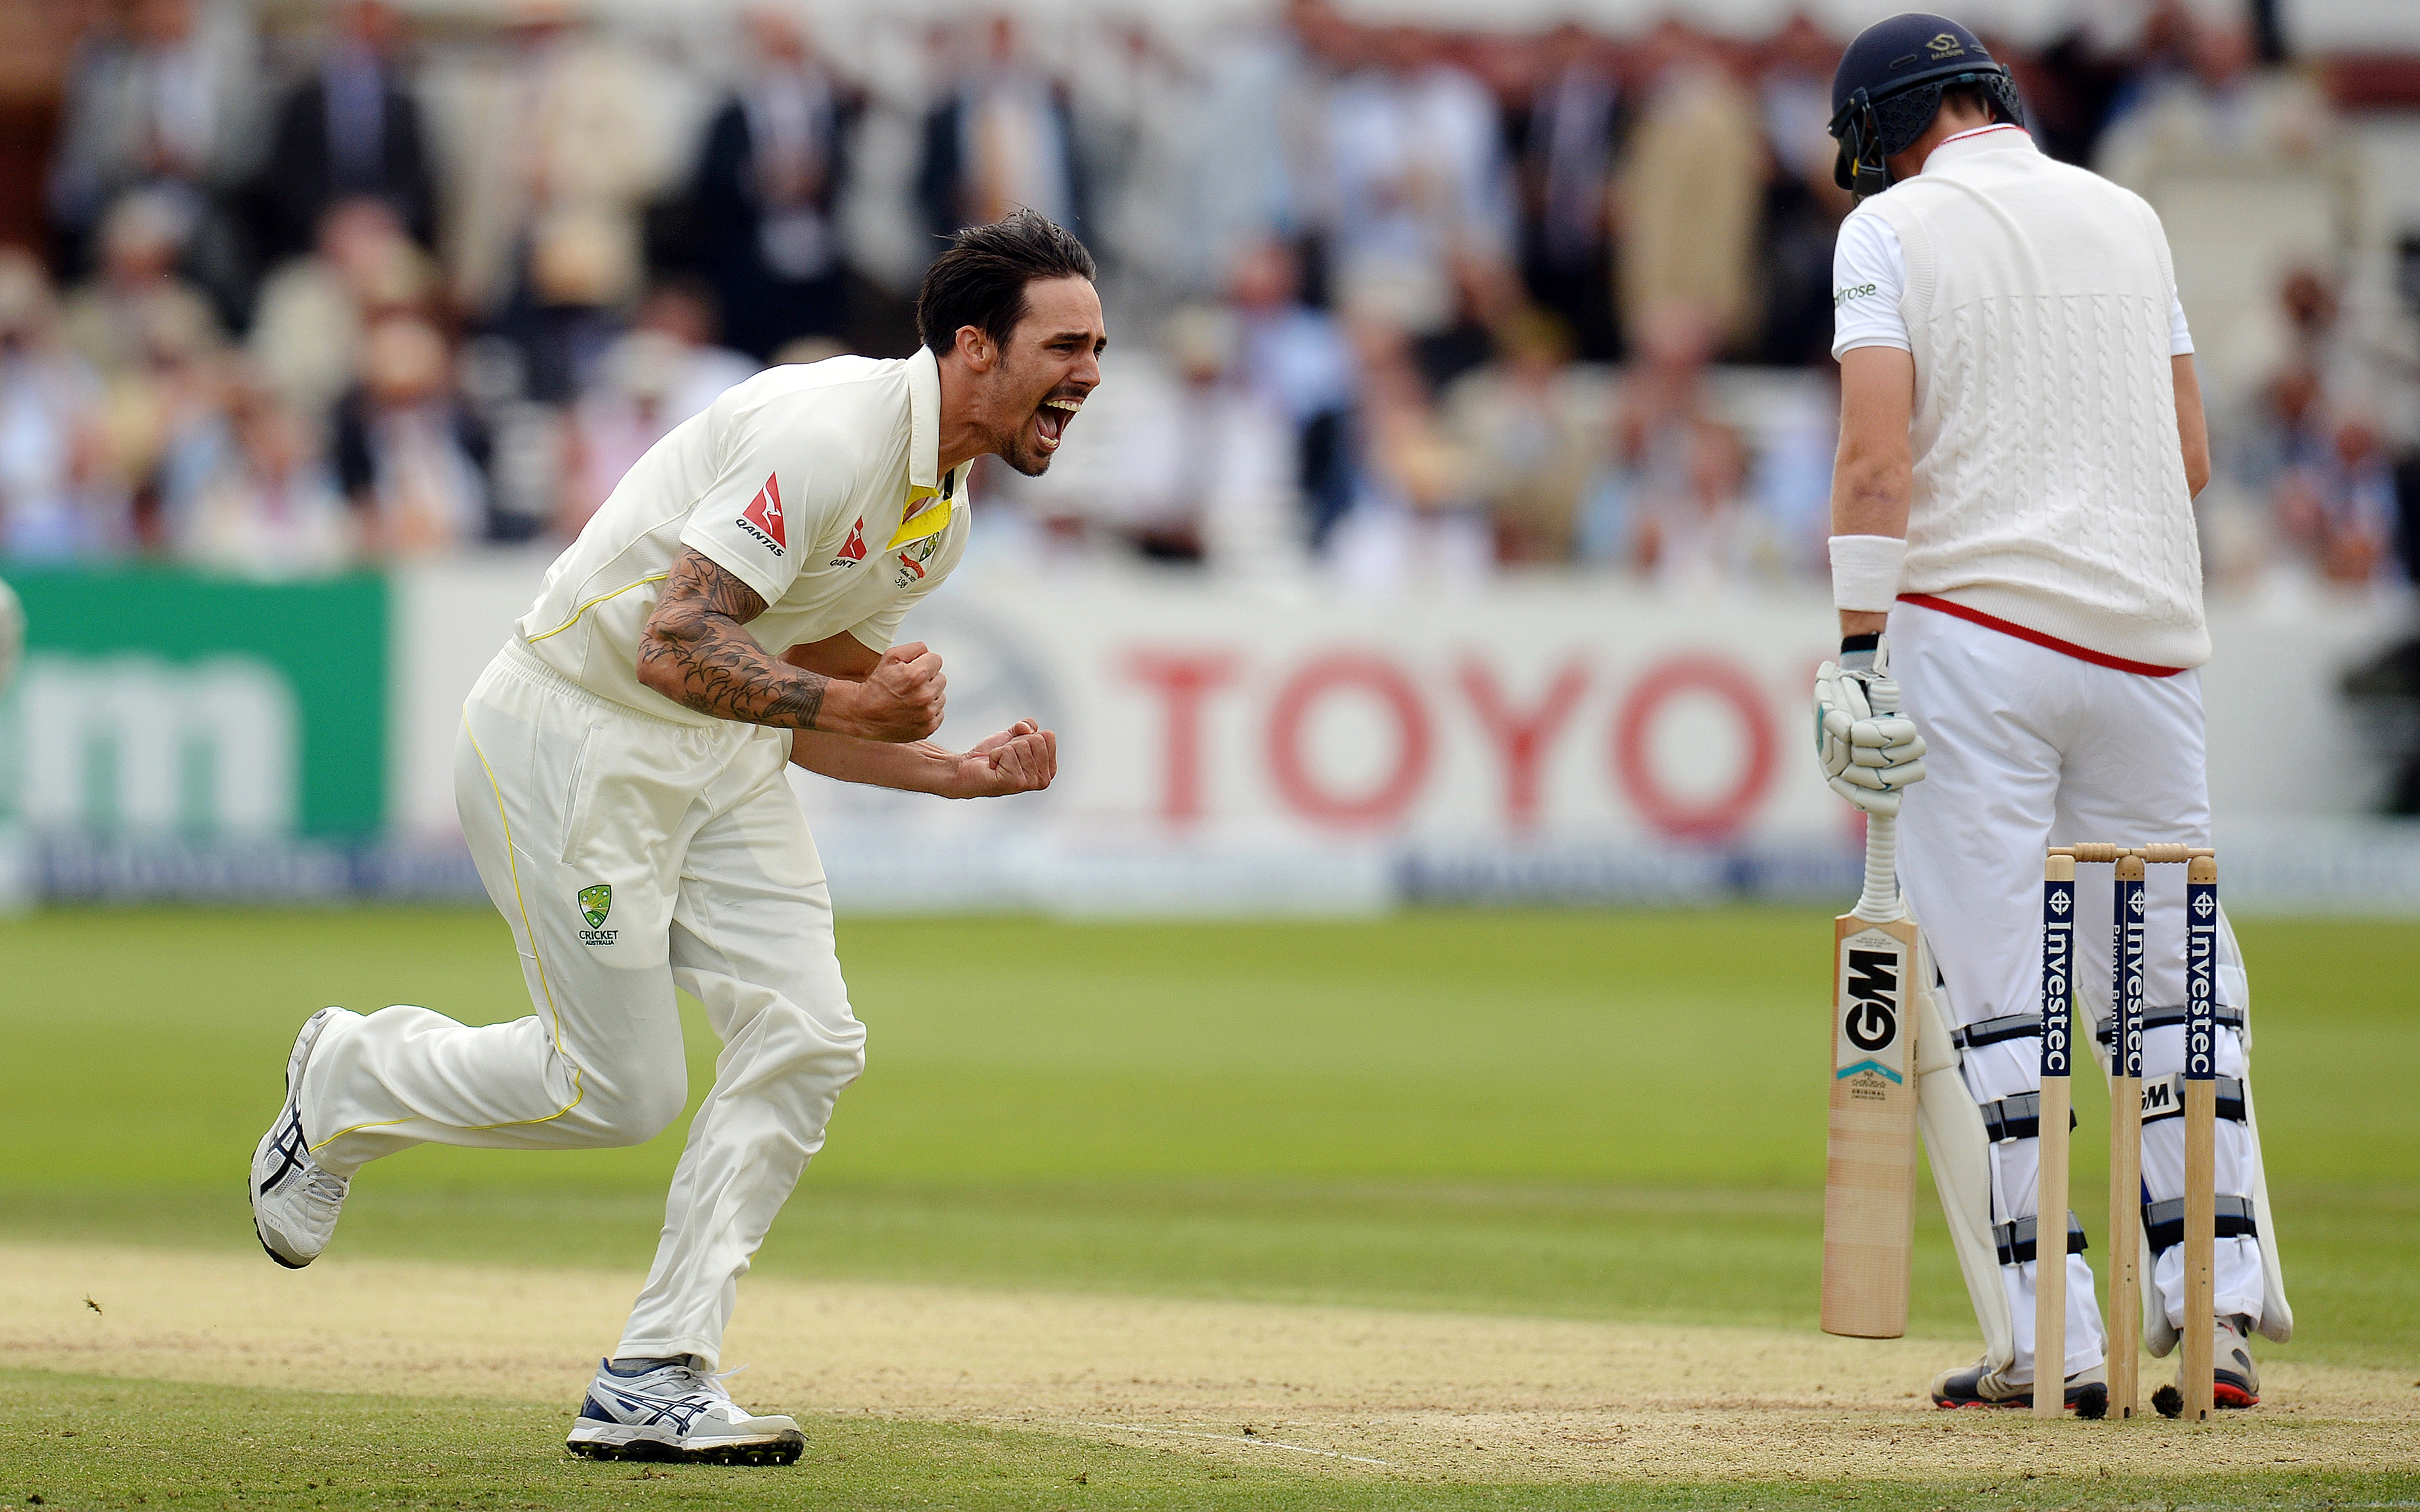 Australia's Mitchell Johnson celebrates after dismissing England's Joe Root for one run. Photo: Reuters